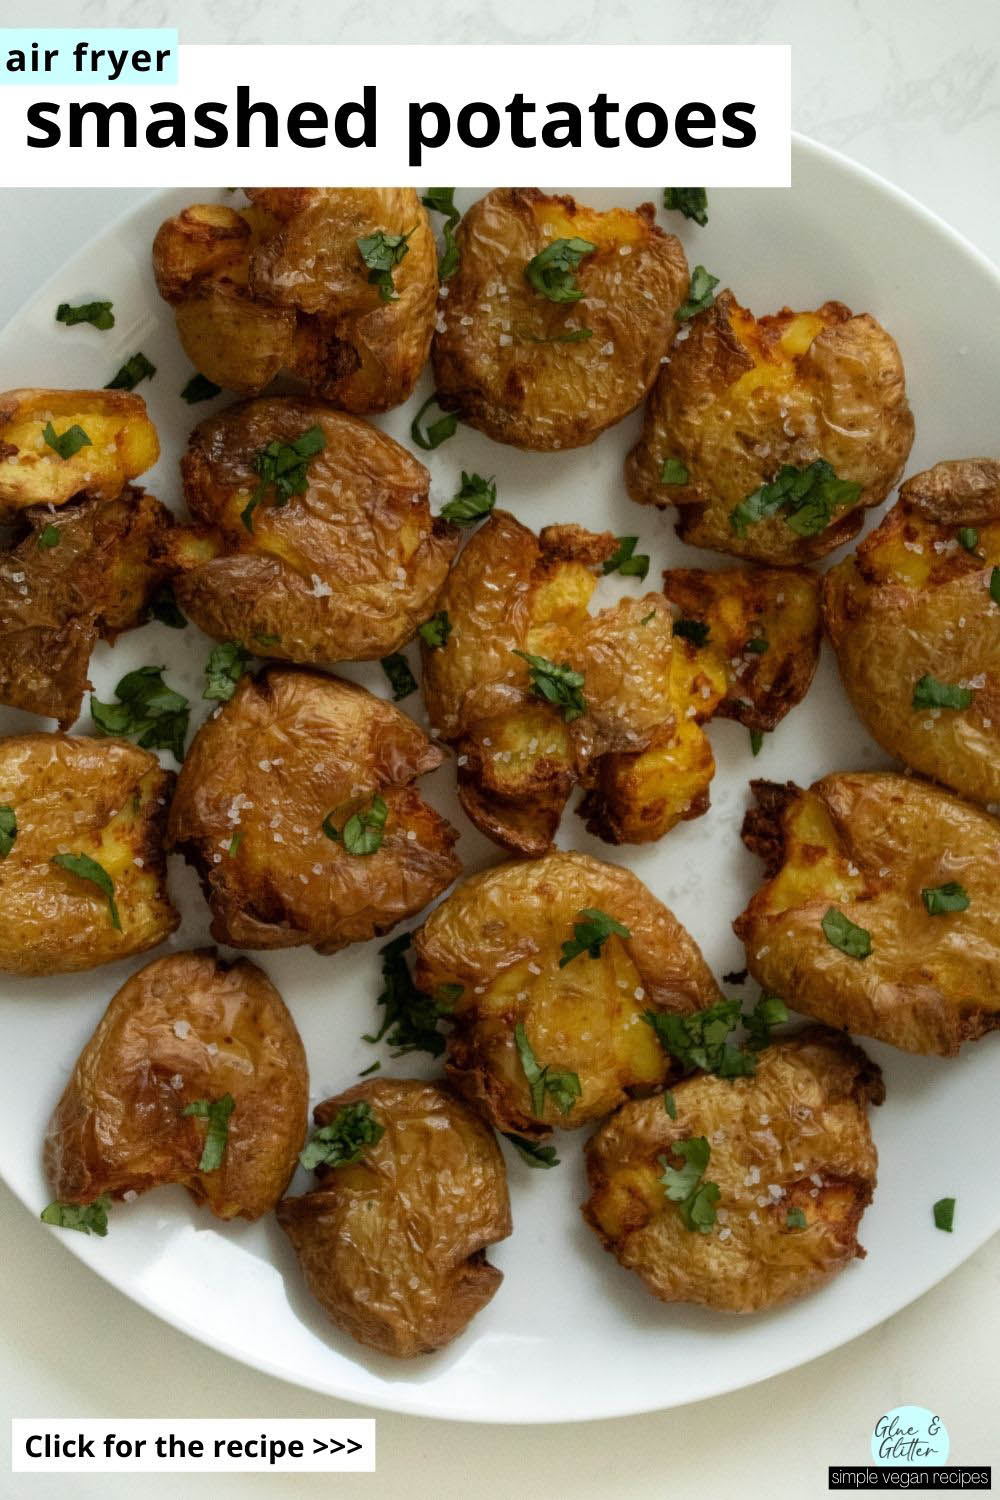 air fryer smashed potatoes topped with sea salt and fresh herbs, text overlay